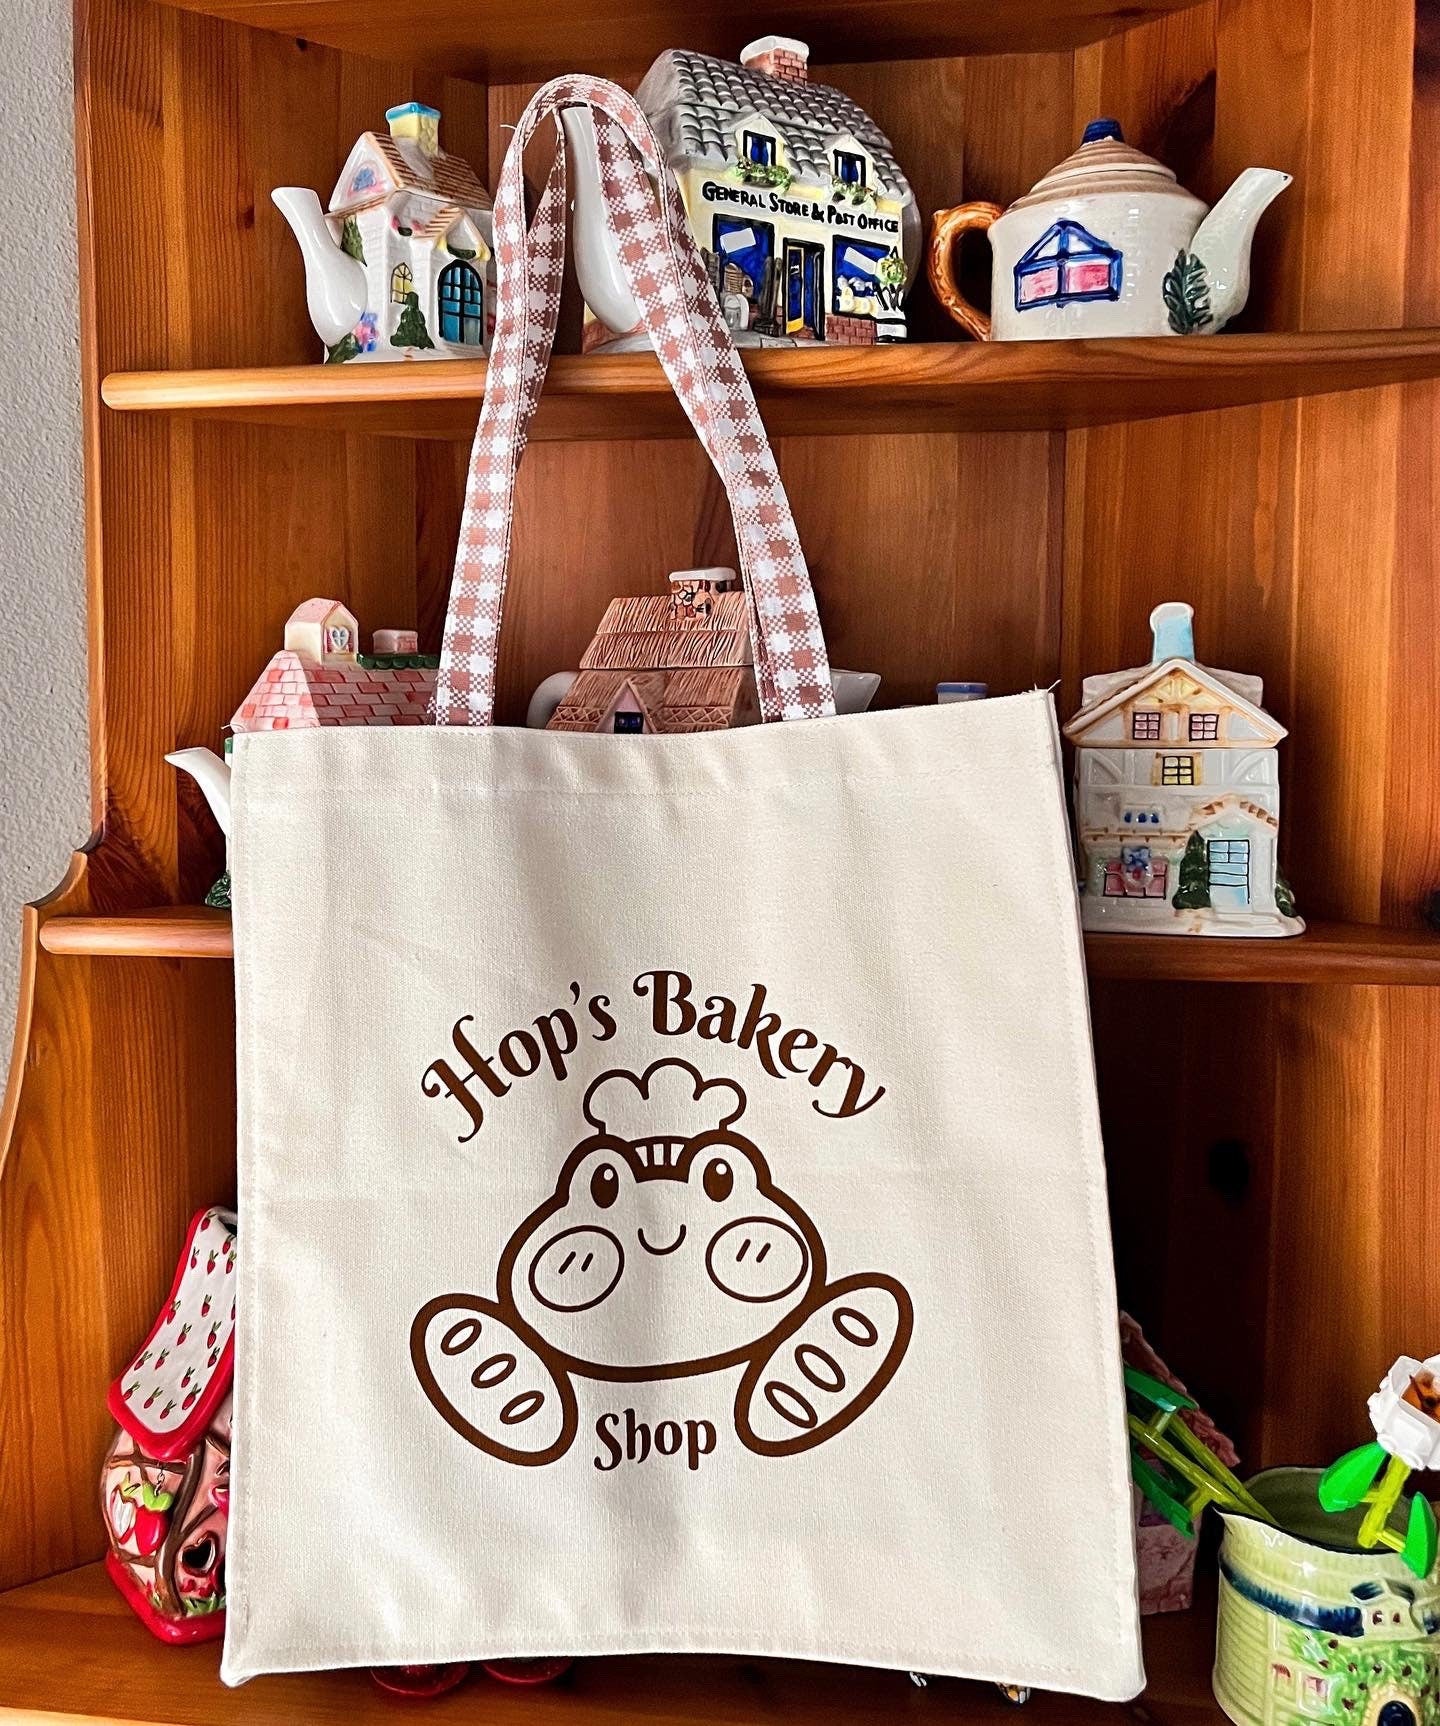 Hop’s Bakery Tote